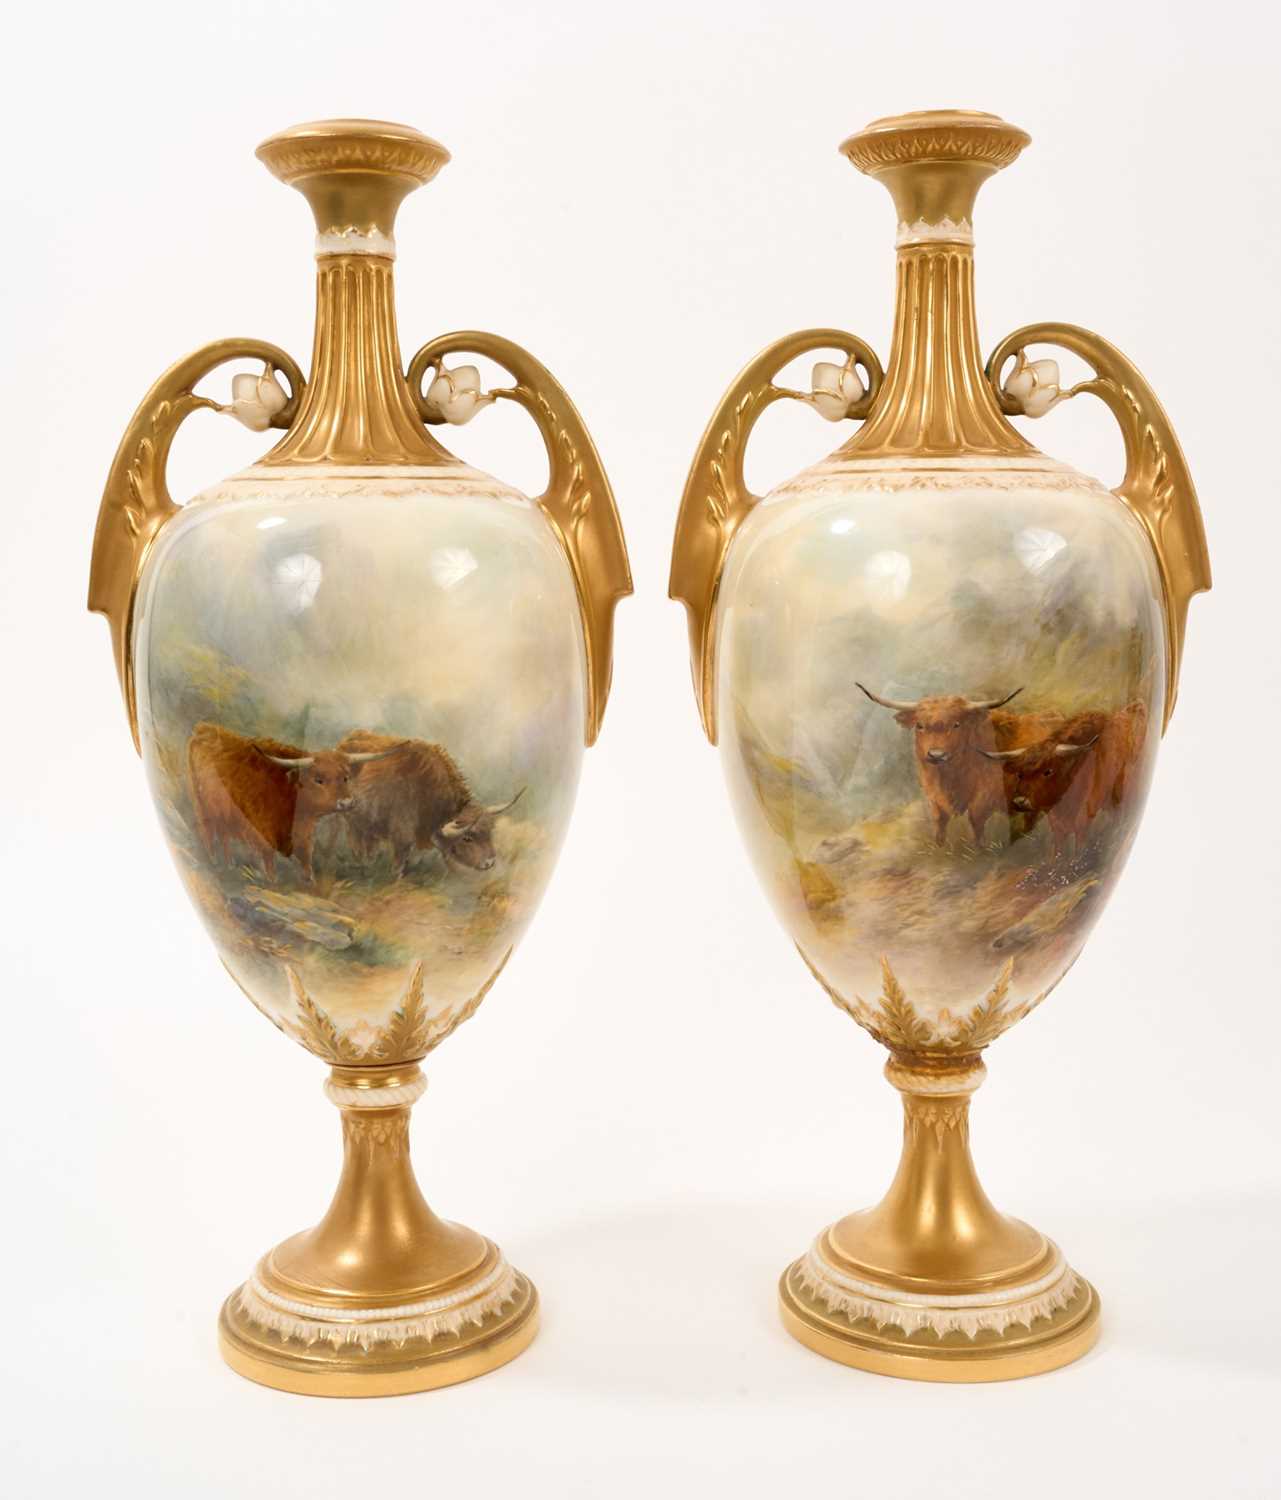 Lot 86 - Large pair of Royal Worcester vases, decorated with cattle by James Stinton